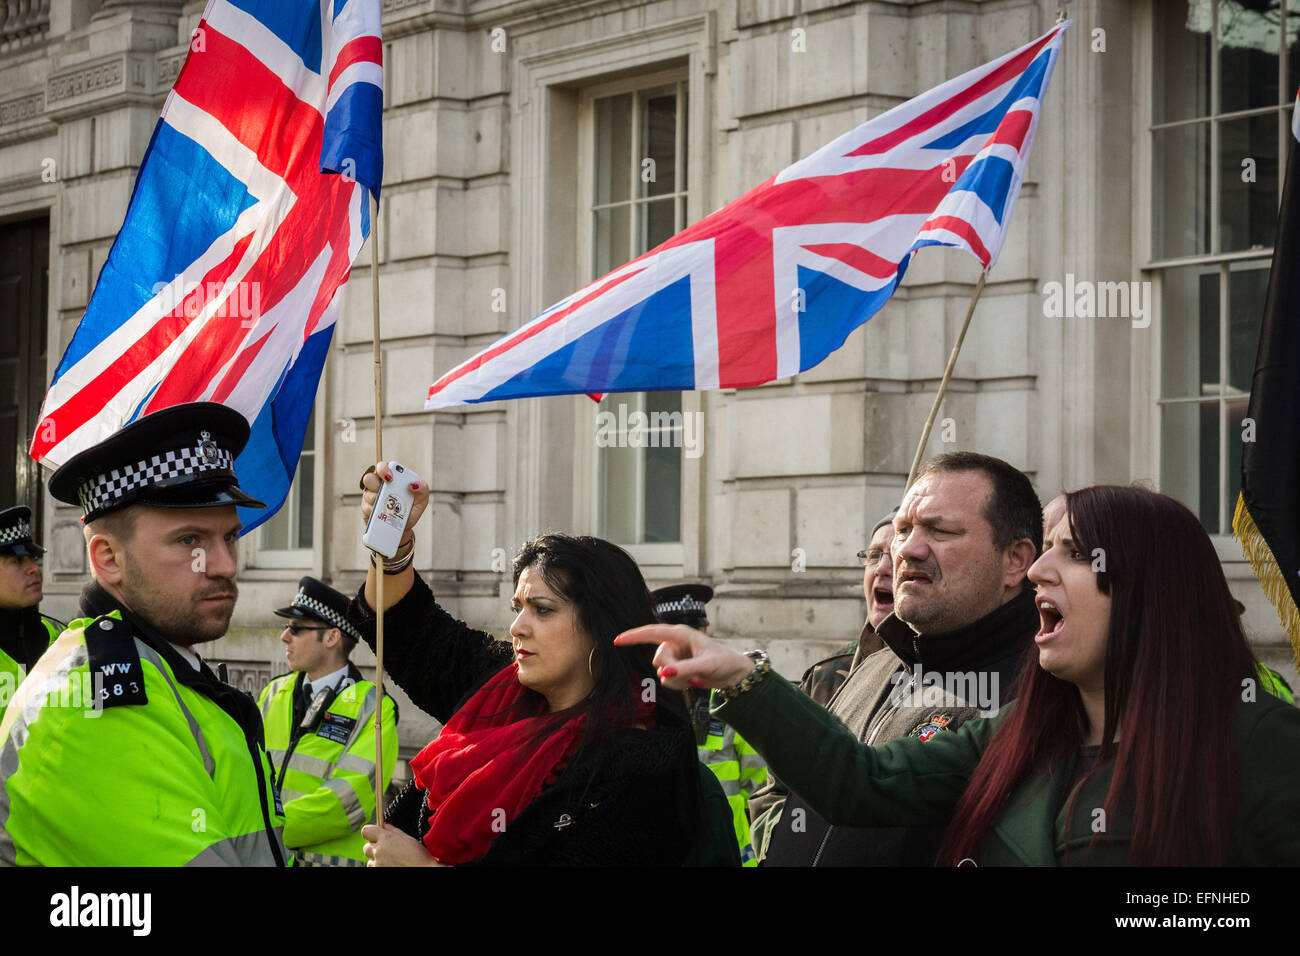 London, UK. 8. Februar 2015. Britain First Gruppe Counter Protest muslimische Demonstration Credit: Guy Corbishley/Alamy Live News Stockfoto